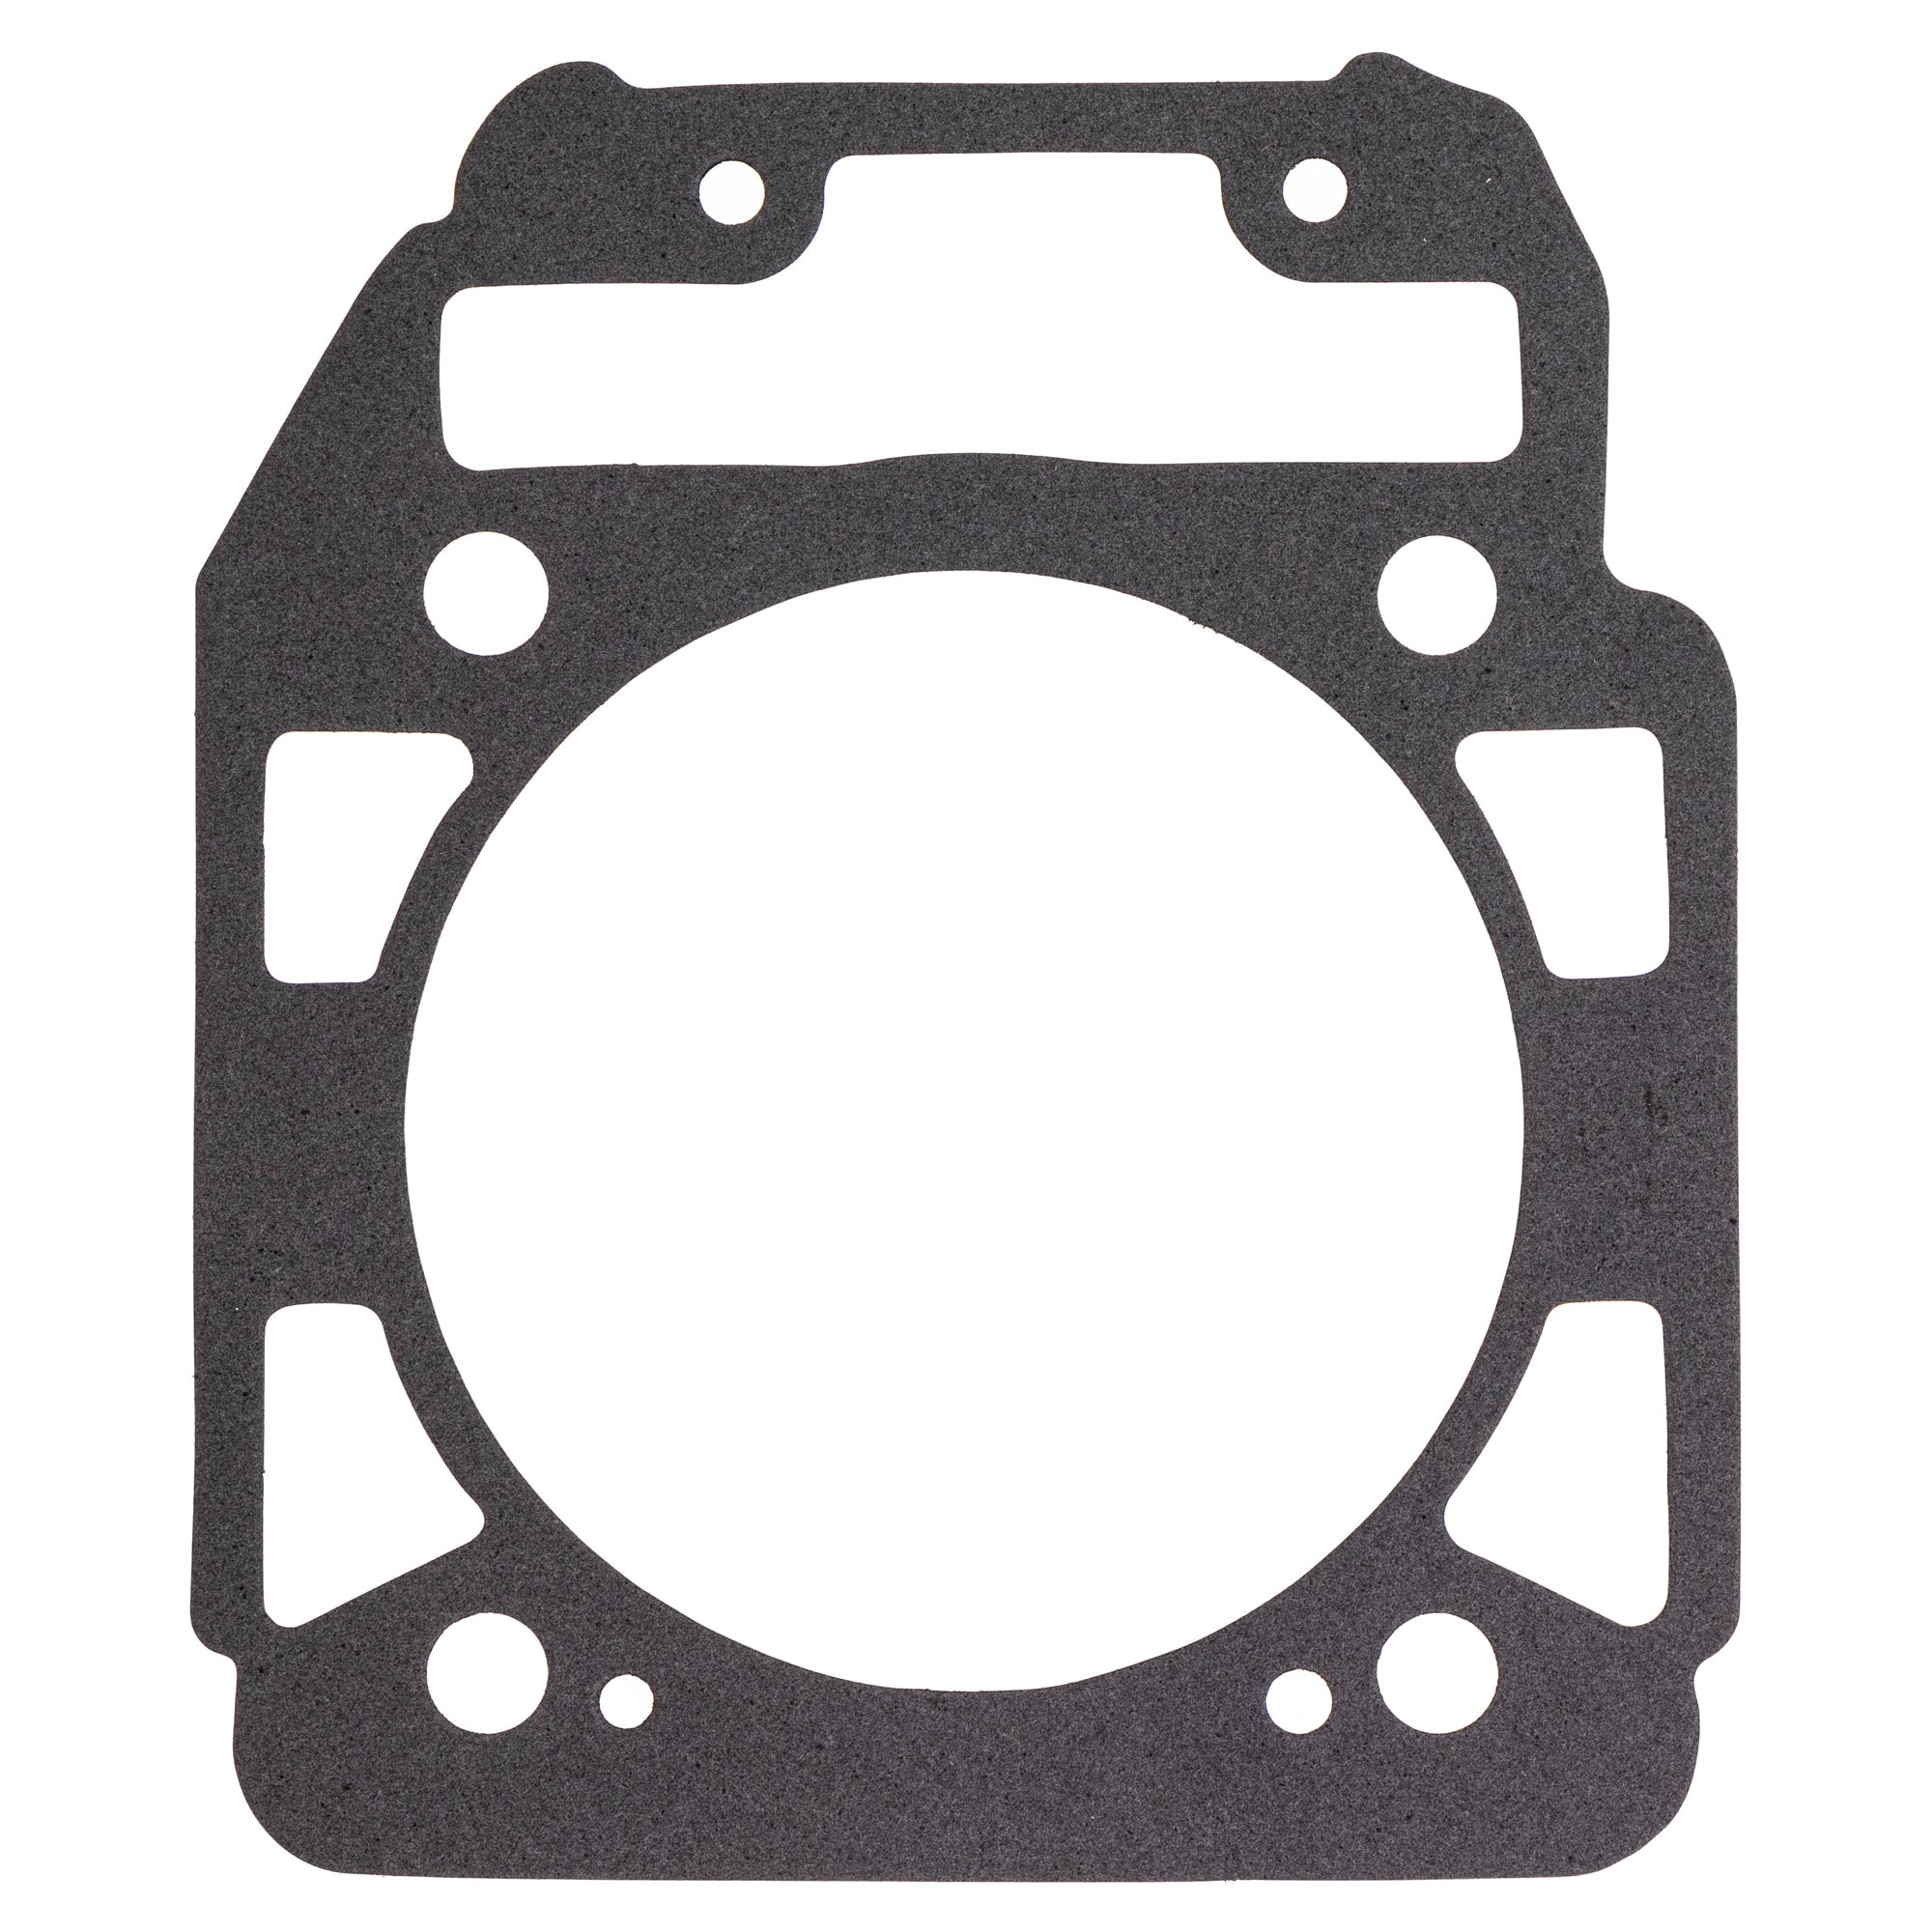 Piston Gasket Spark Plug Kit For Can-Am Bombardier MK1001145